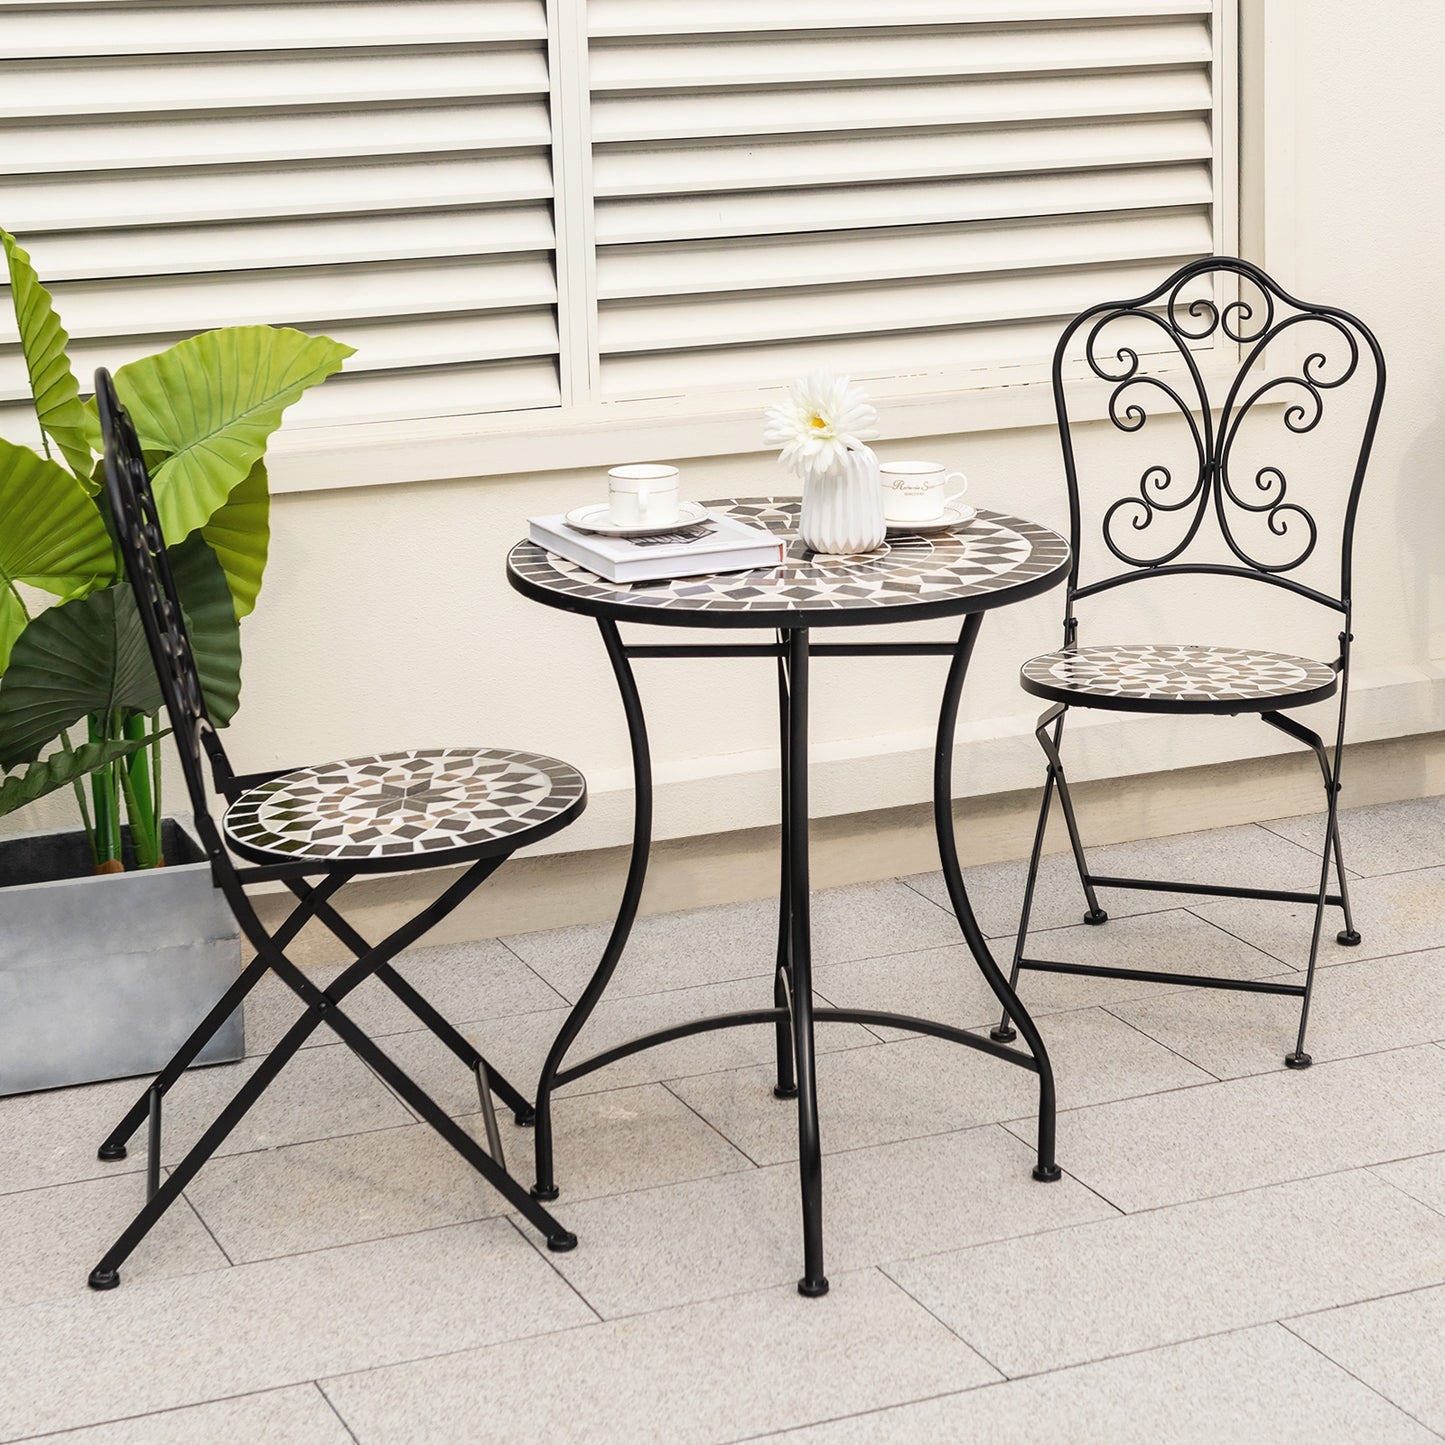 Set of 2 Mosaic Chairs for Patio Metal Folding Chairs-C